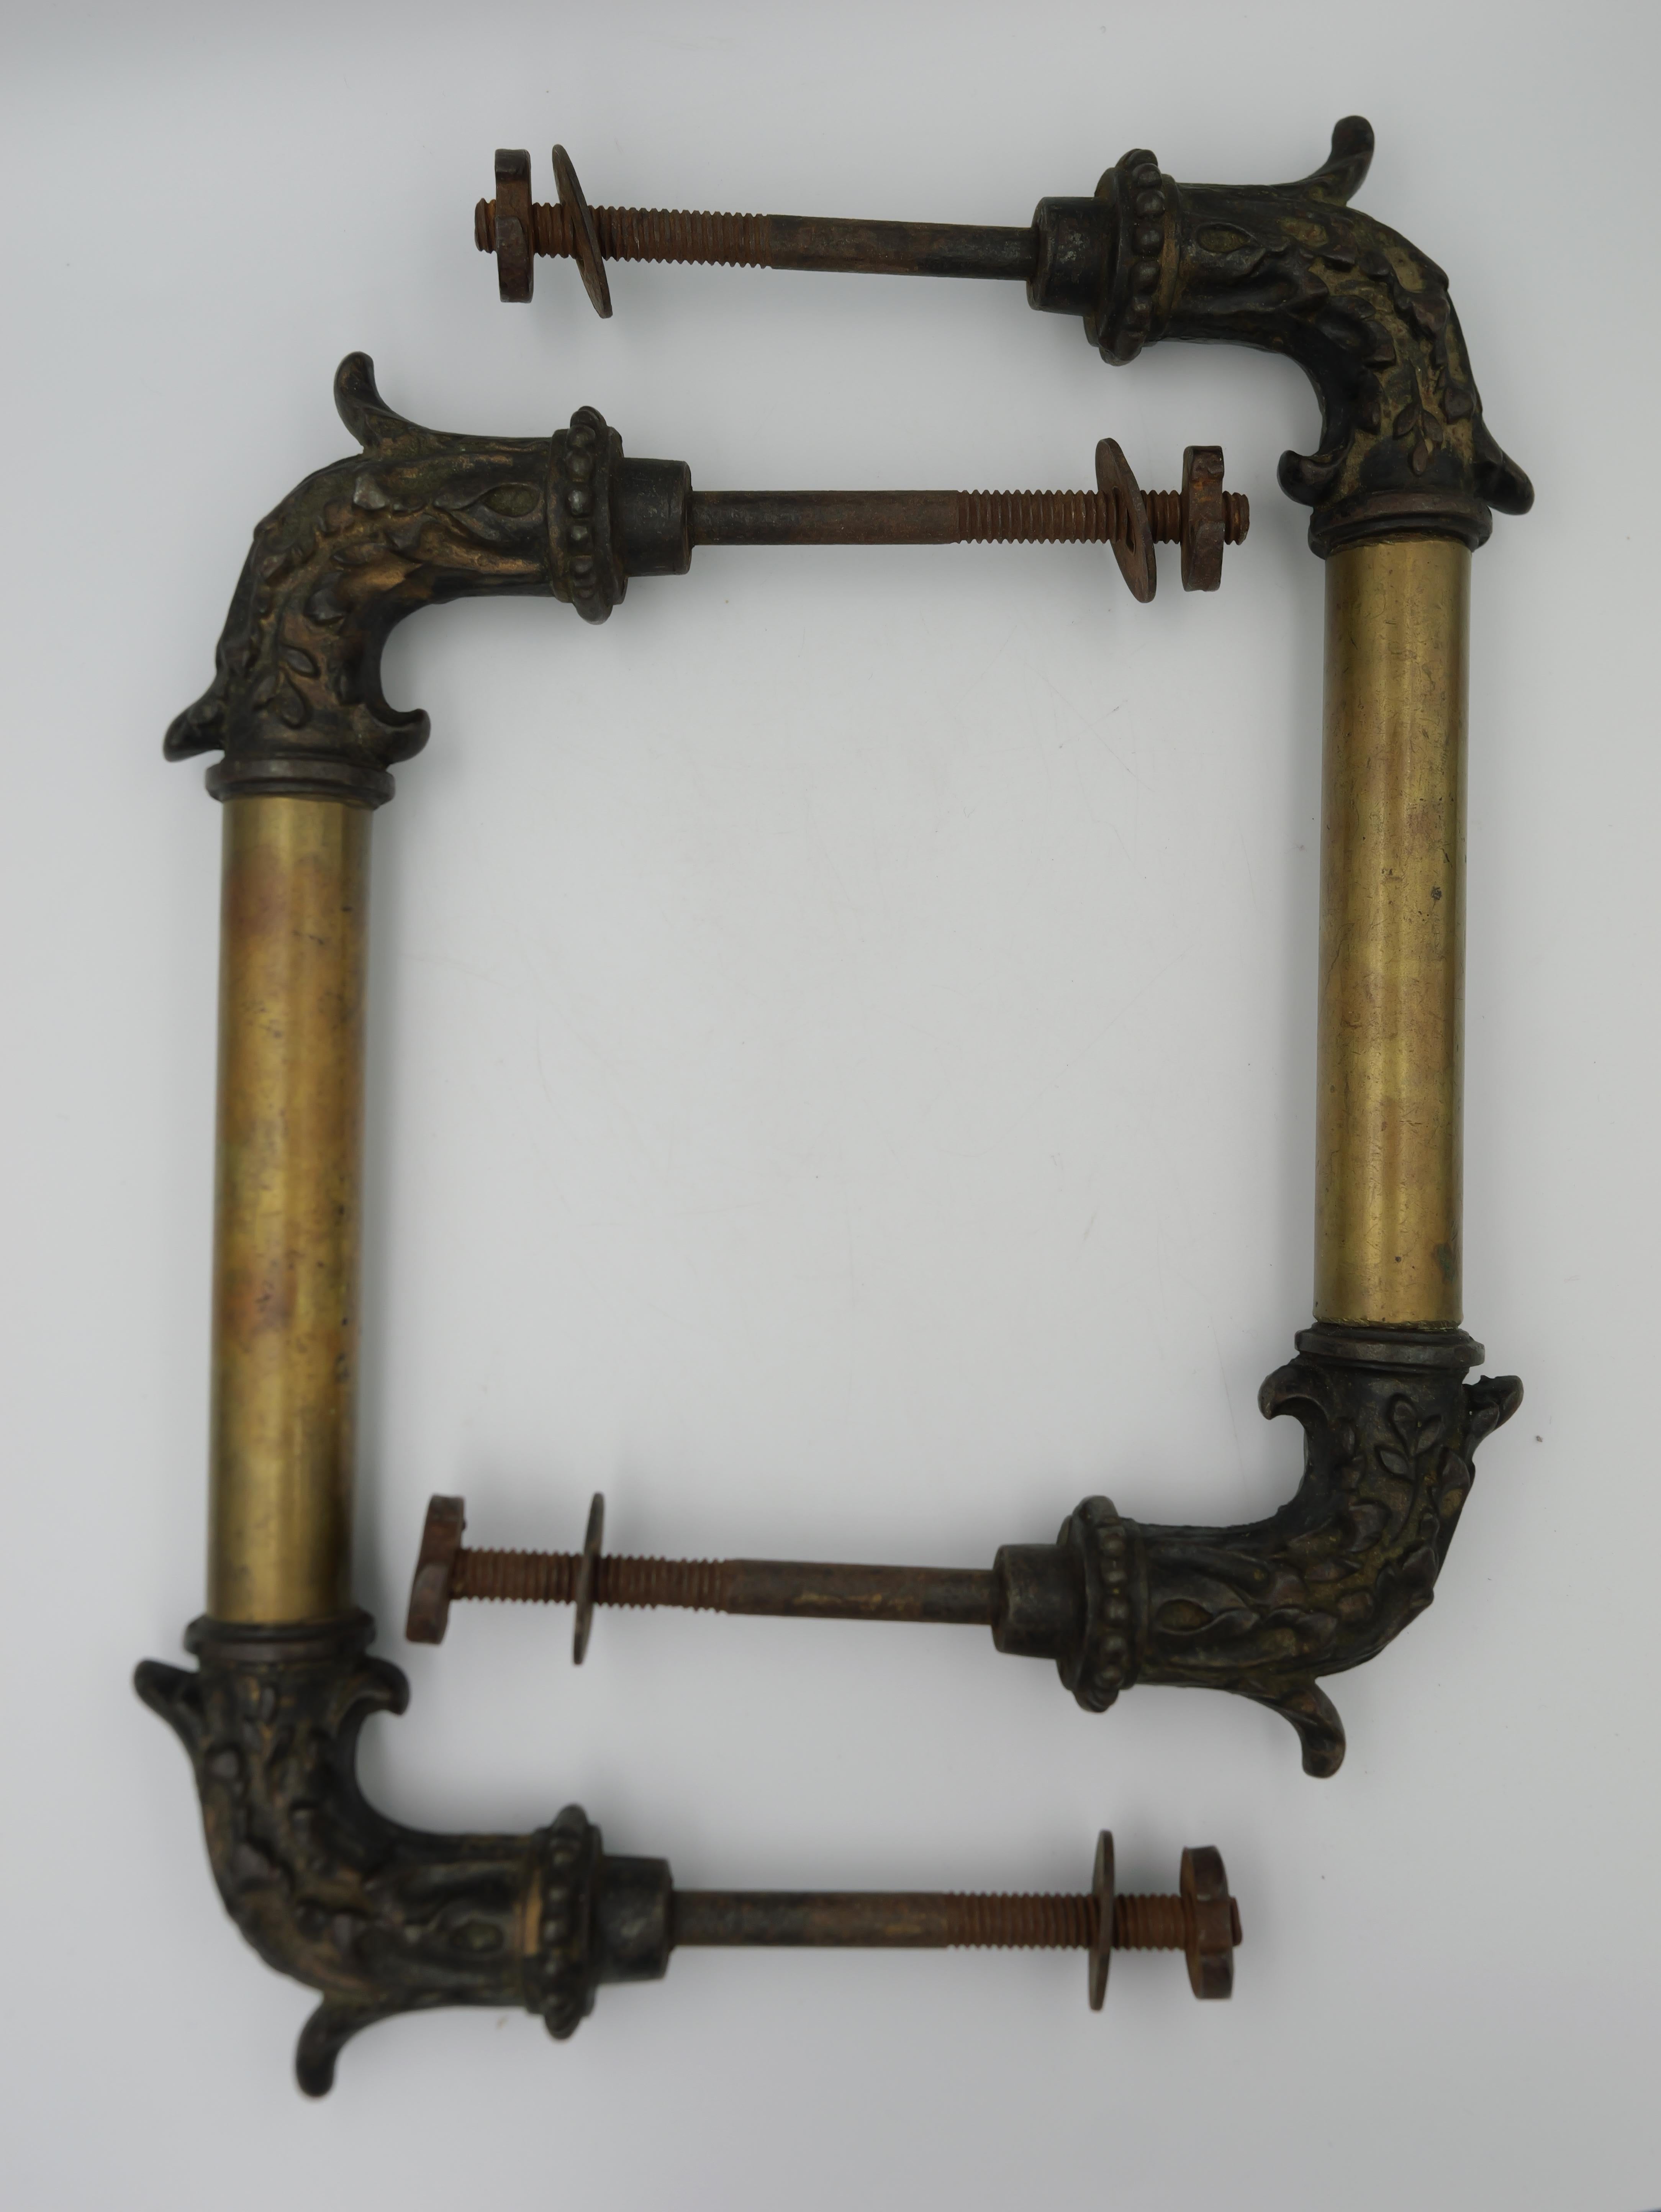 This pair of antique bronze and copper door handles is a remarkable testament to the beauty and craftsmanship of a bygone era. These exquisite handles, crafted from a combination of bronze and copper, exude a timeless elegance that enhances the